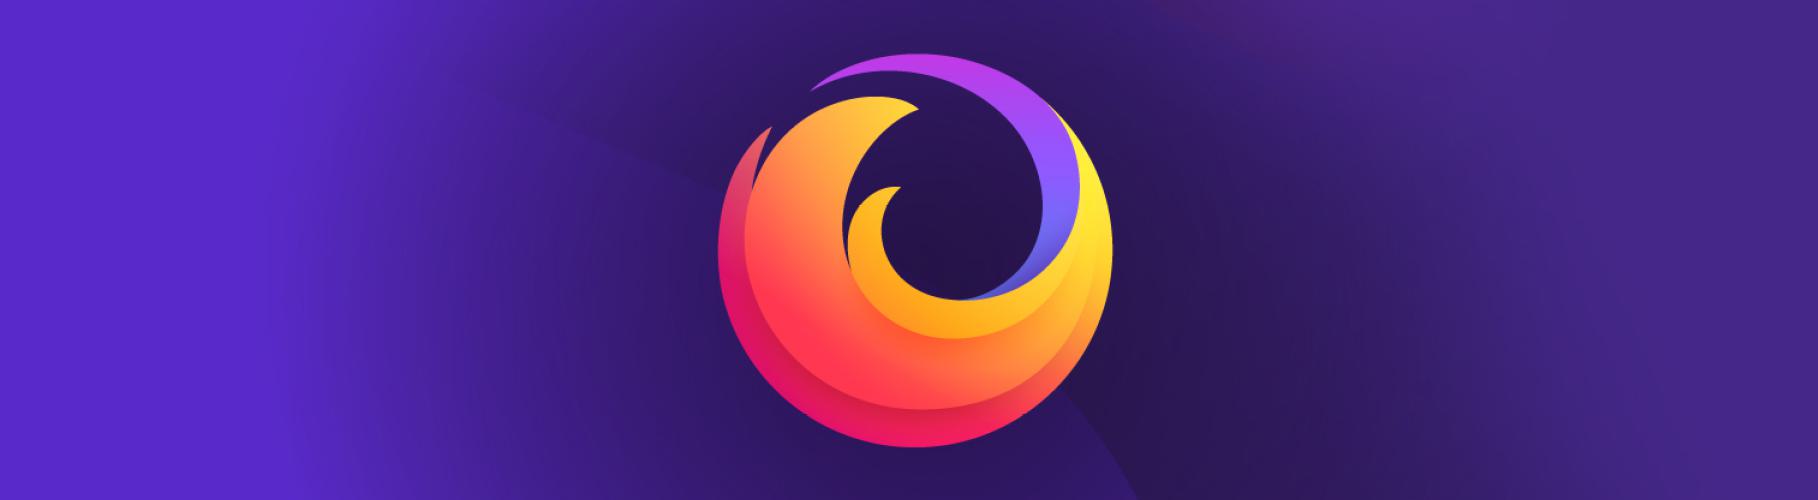 TopIC Banner - What IC can learn from the Firefox logo redesign